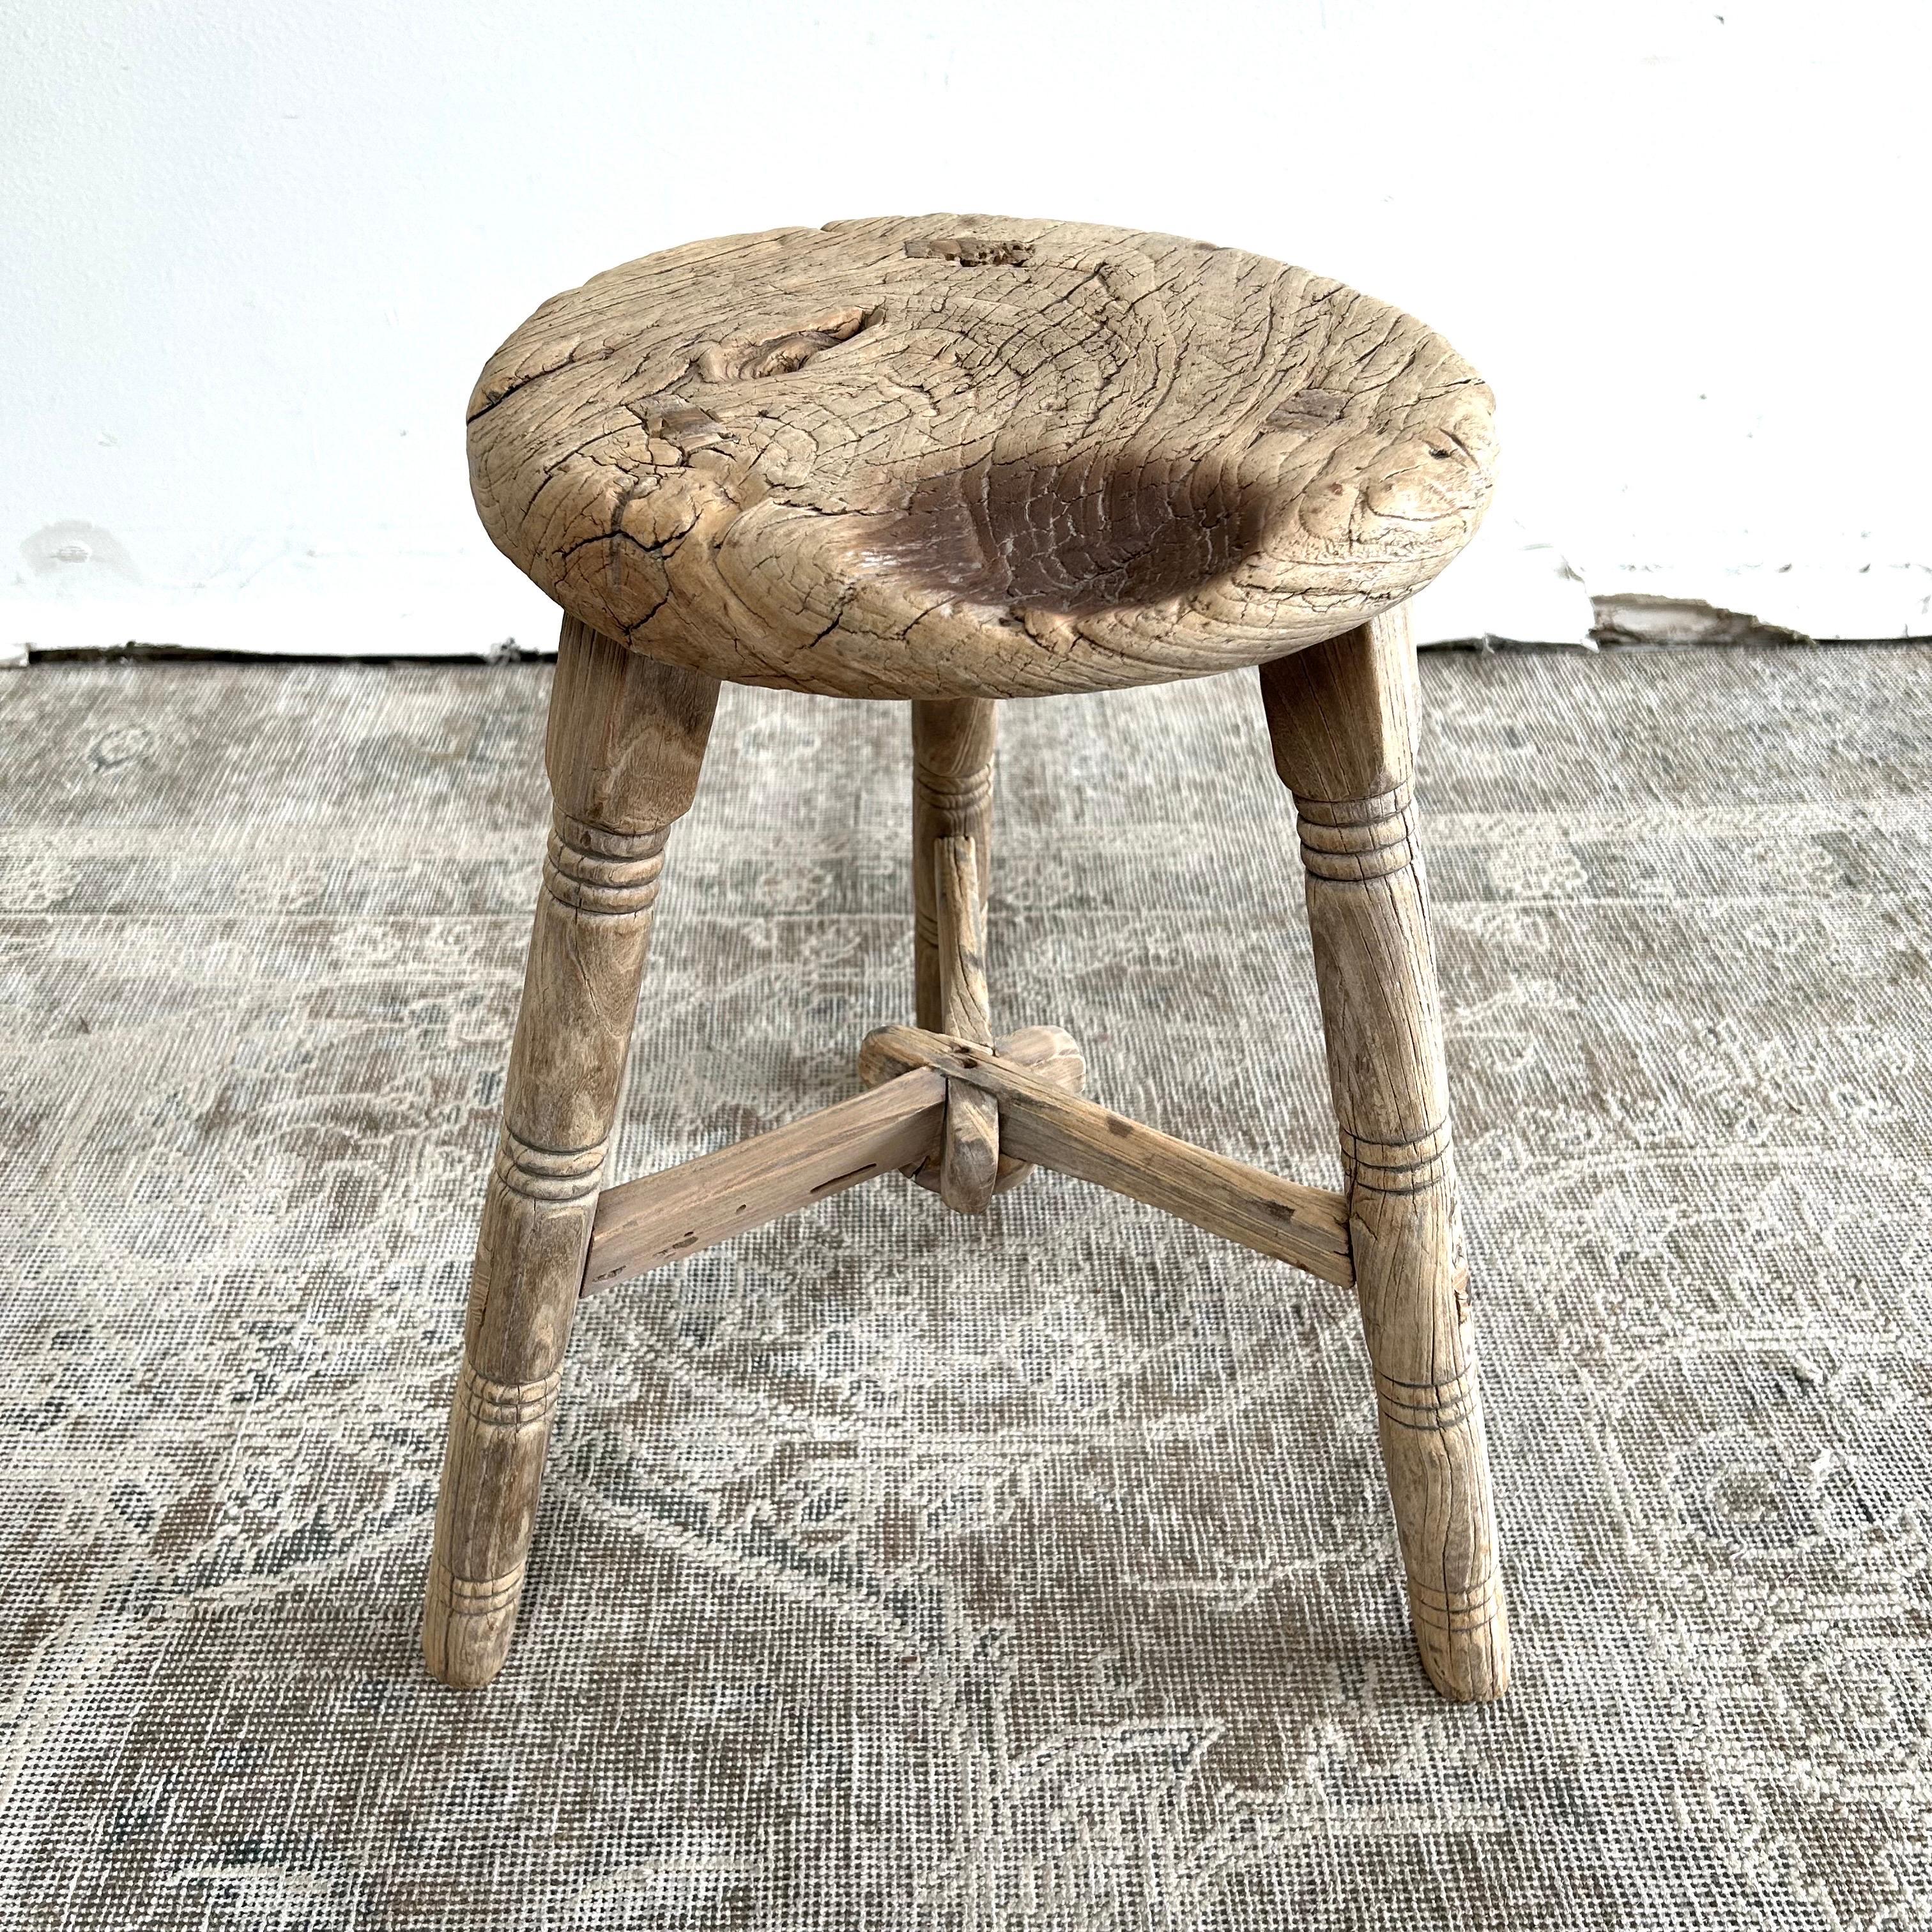 These are the real vintage antique elm wood stools! Beautiful antique patina, with weathering and age, these are solid and sturdy ready for daily use, use as a table, stool, drink table, they are great for any space. Each piece is truly unique and